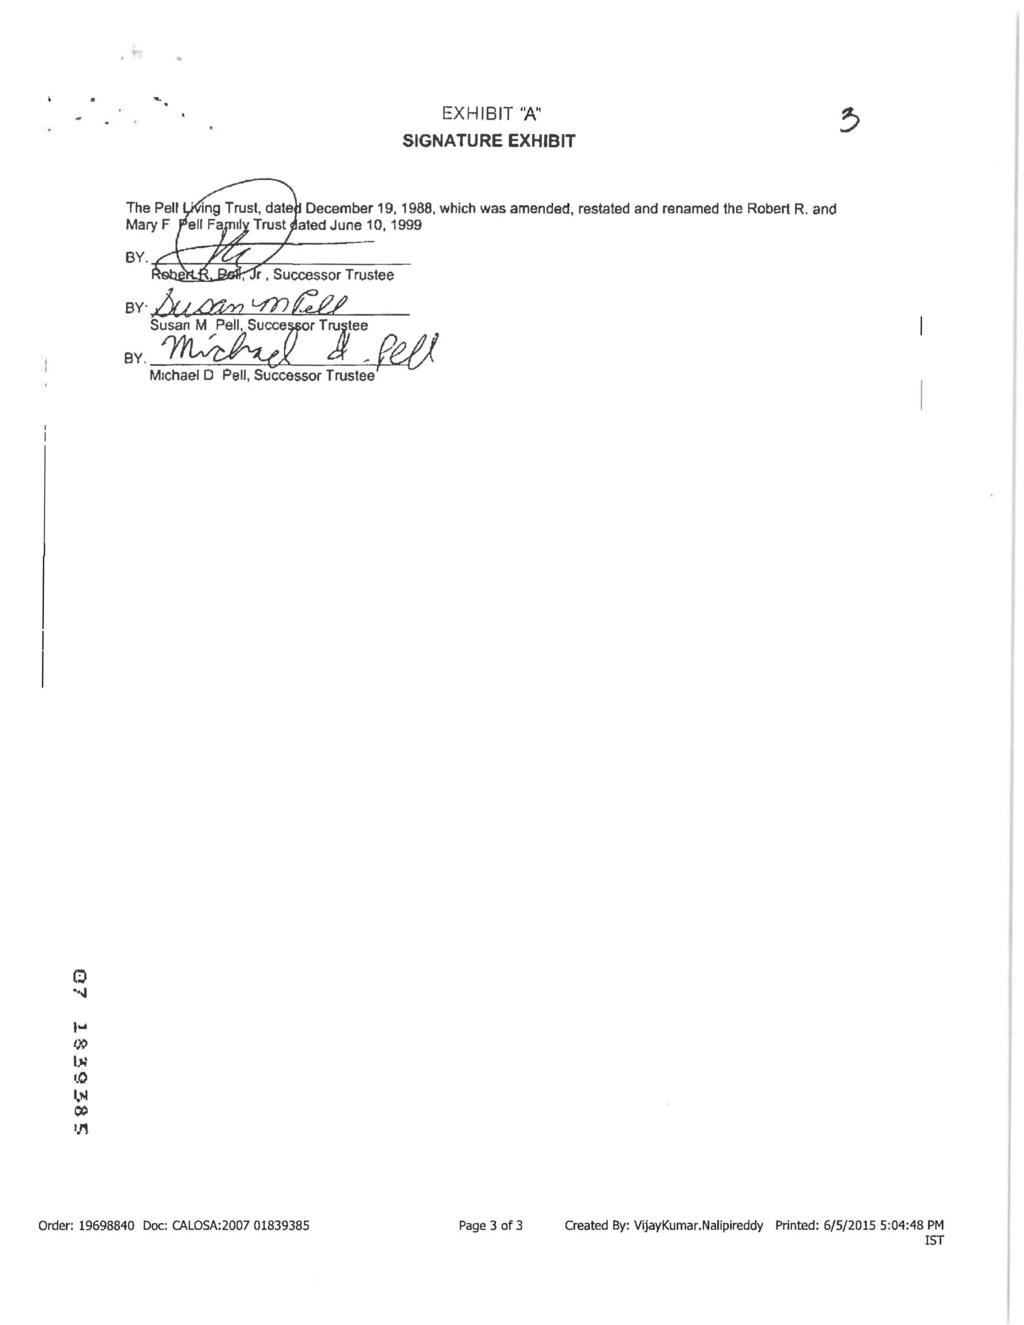 EXHIBIT "A" SIGNATURE EXHIBIT > The Pell Utfing Trust, dated December 19,1988, which was amended, restated and renamed the Robert R, and MaryF Pell Family Trust sated June 1,1999 BY.